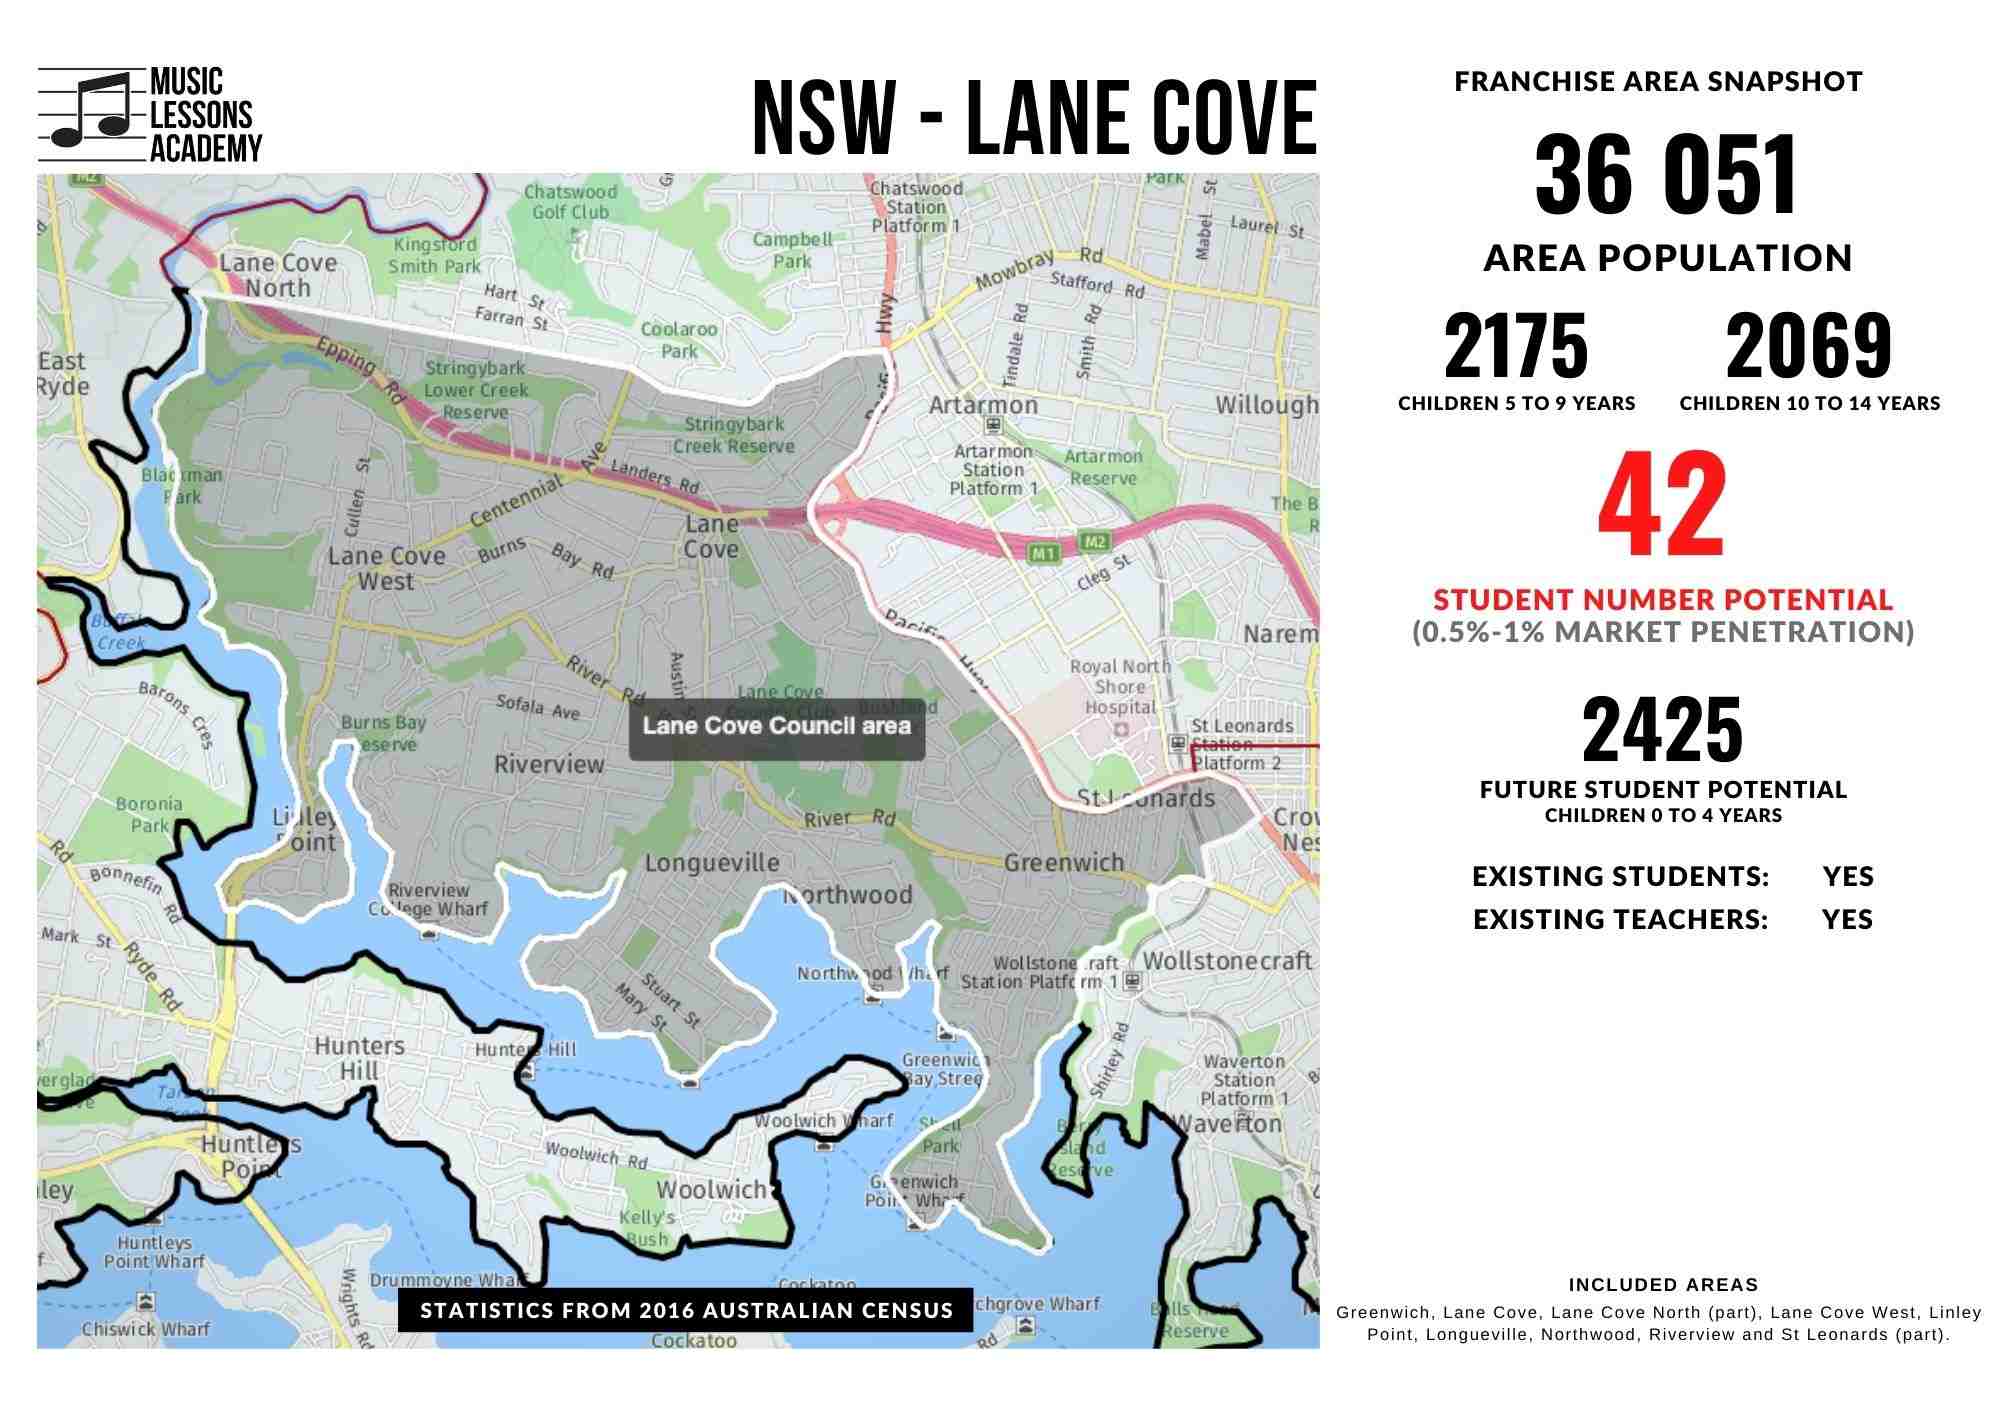 NSW Lane Cove Franchise for sale